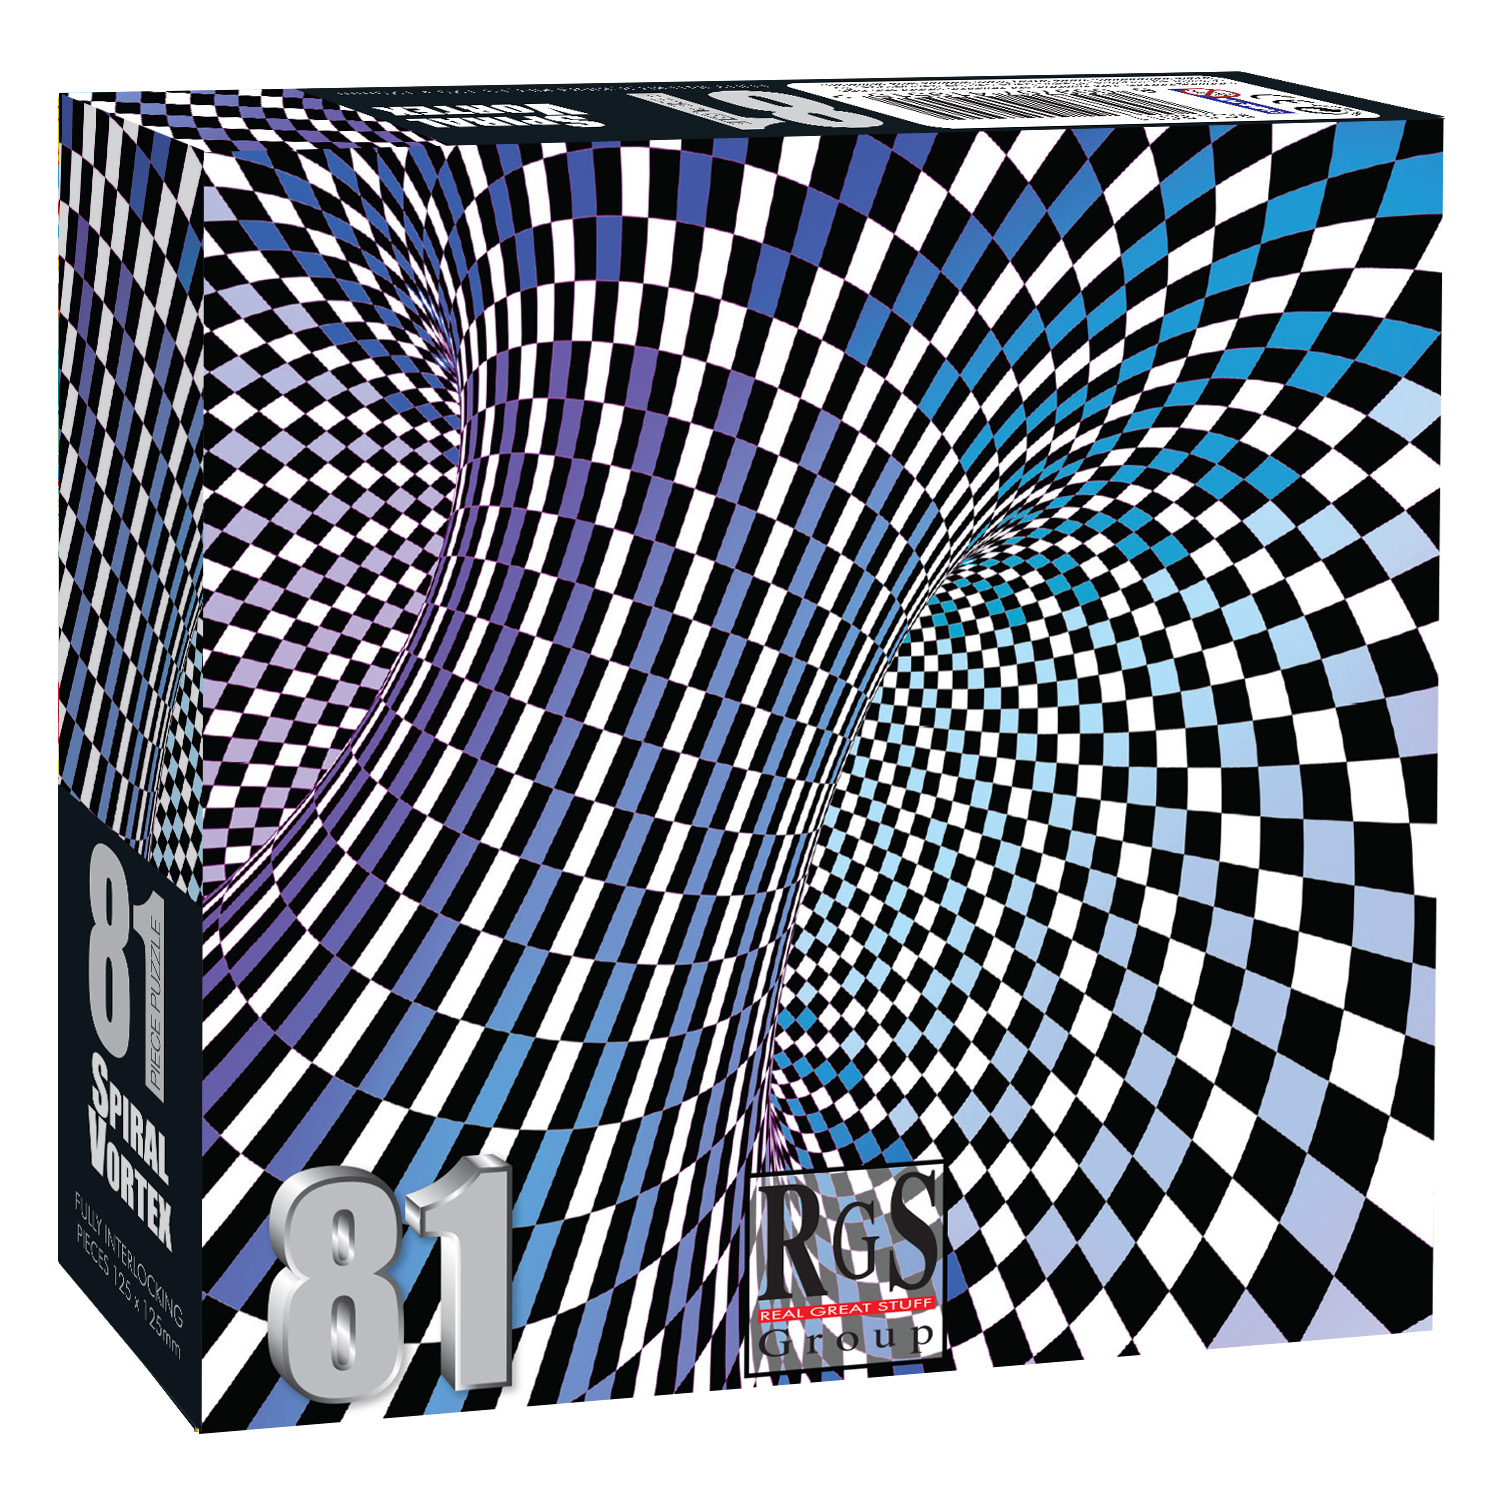 box containing 81pc puzzle of 3D spiral with vortex in blue, white and black